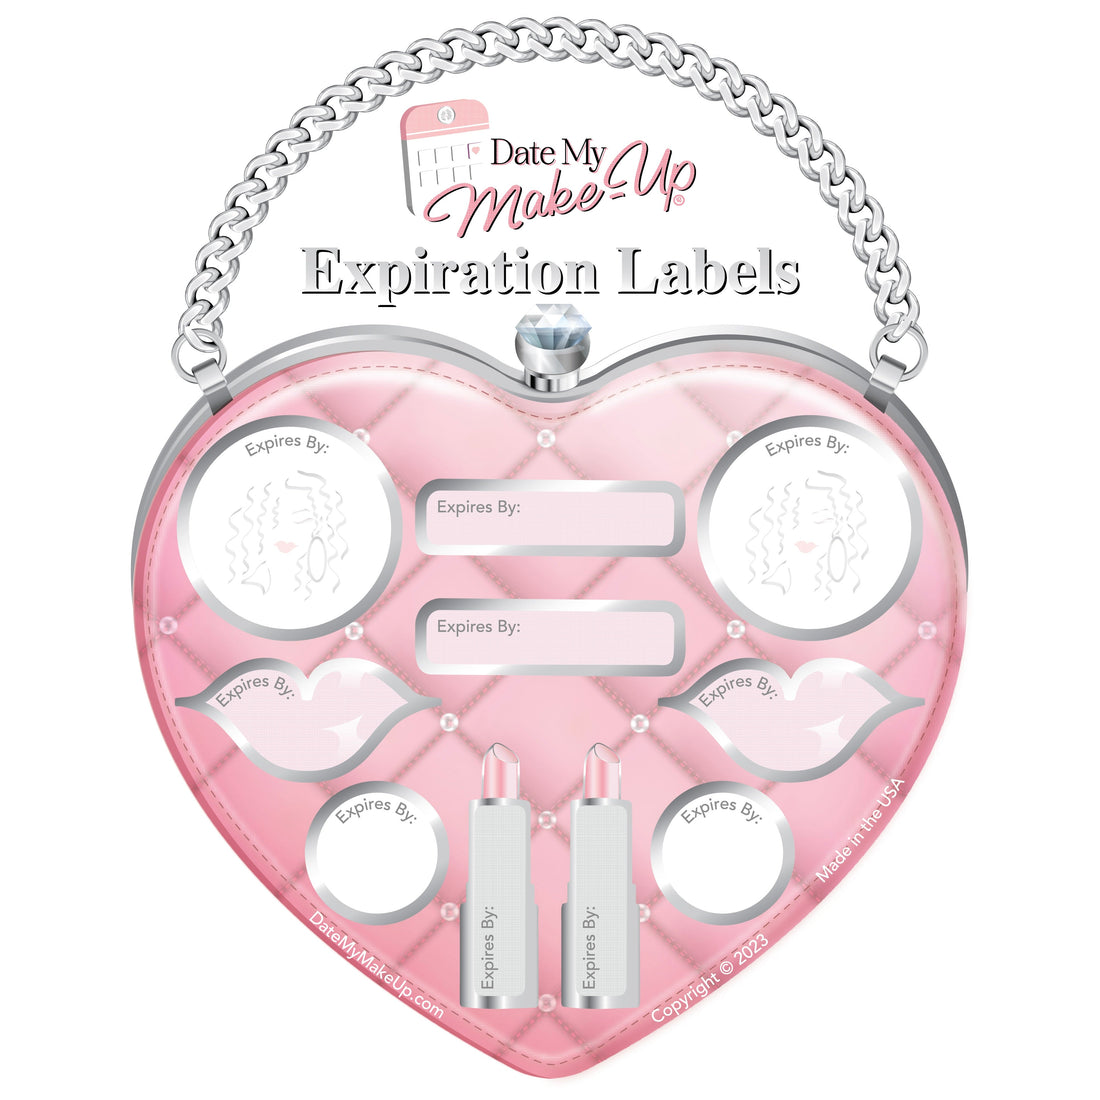 2ND PINK HEART PURSE EXPIRATION DATE LABELS